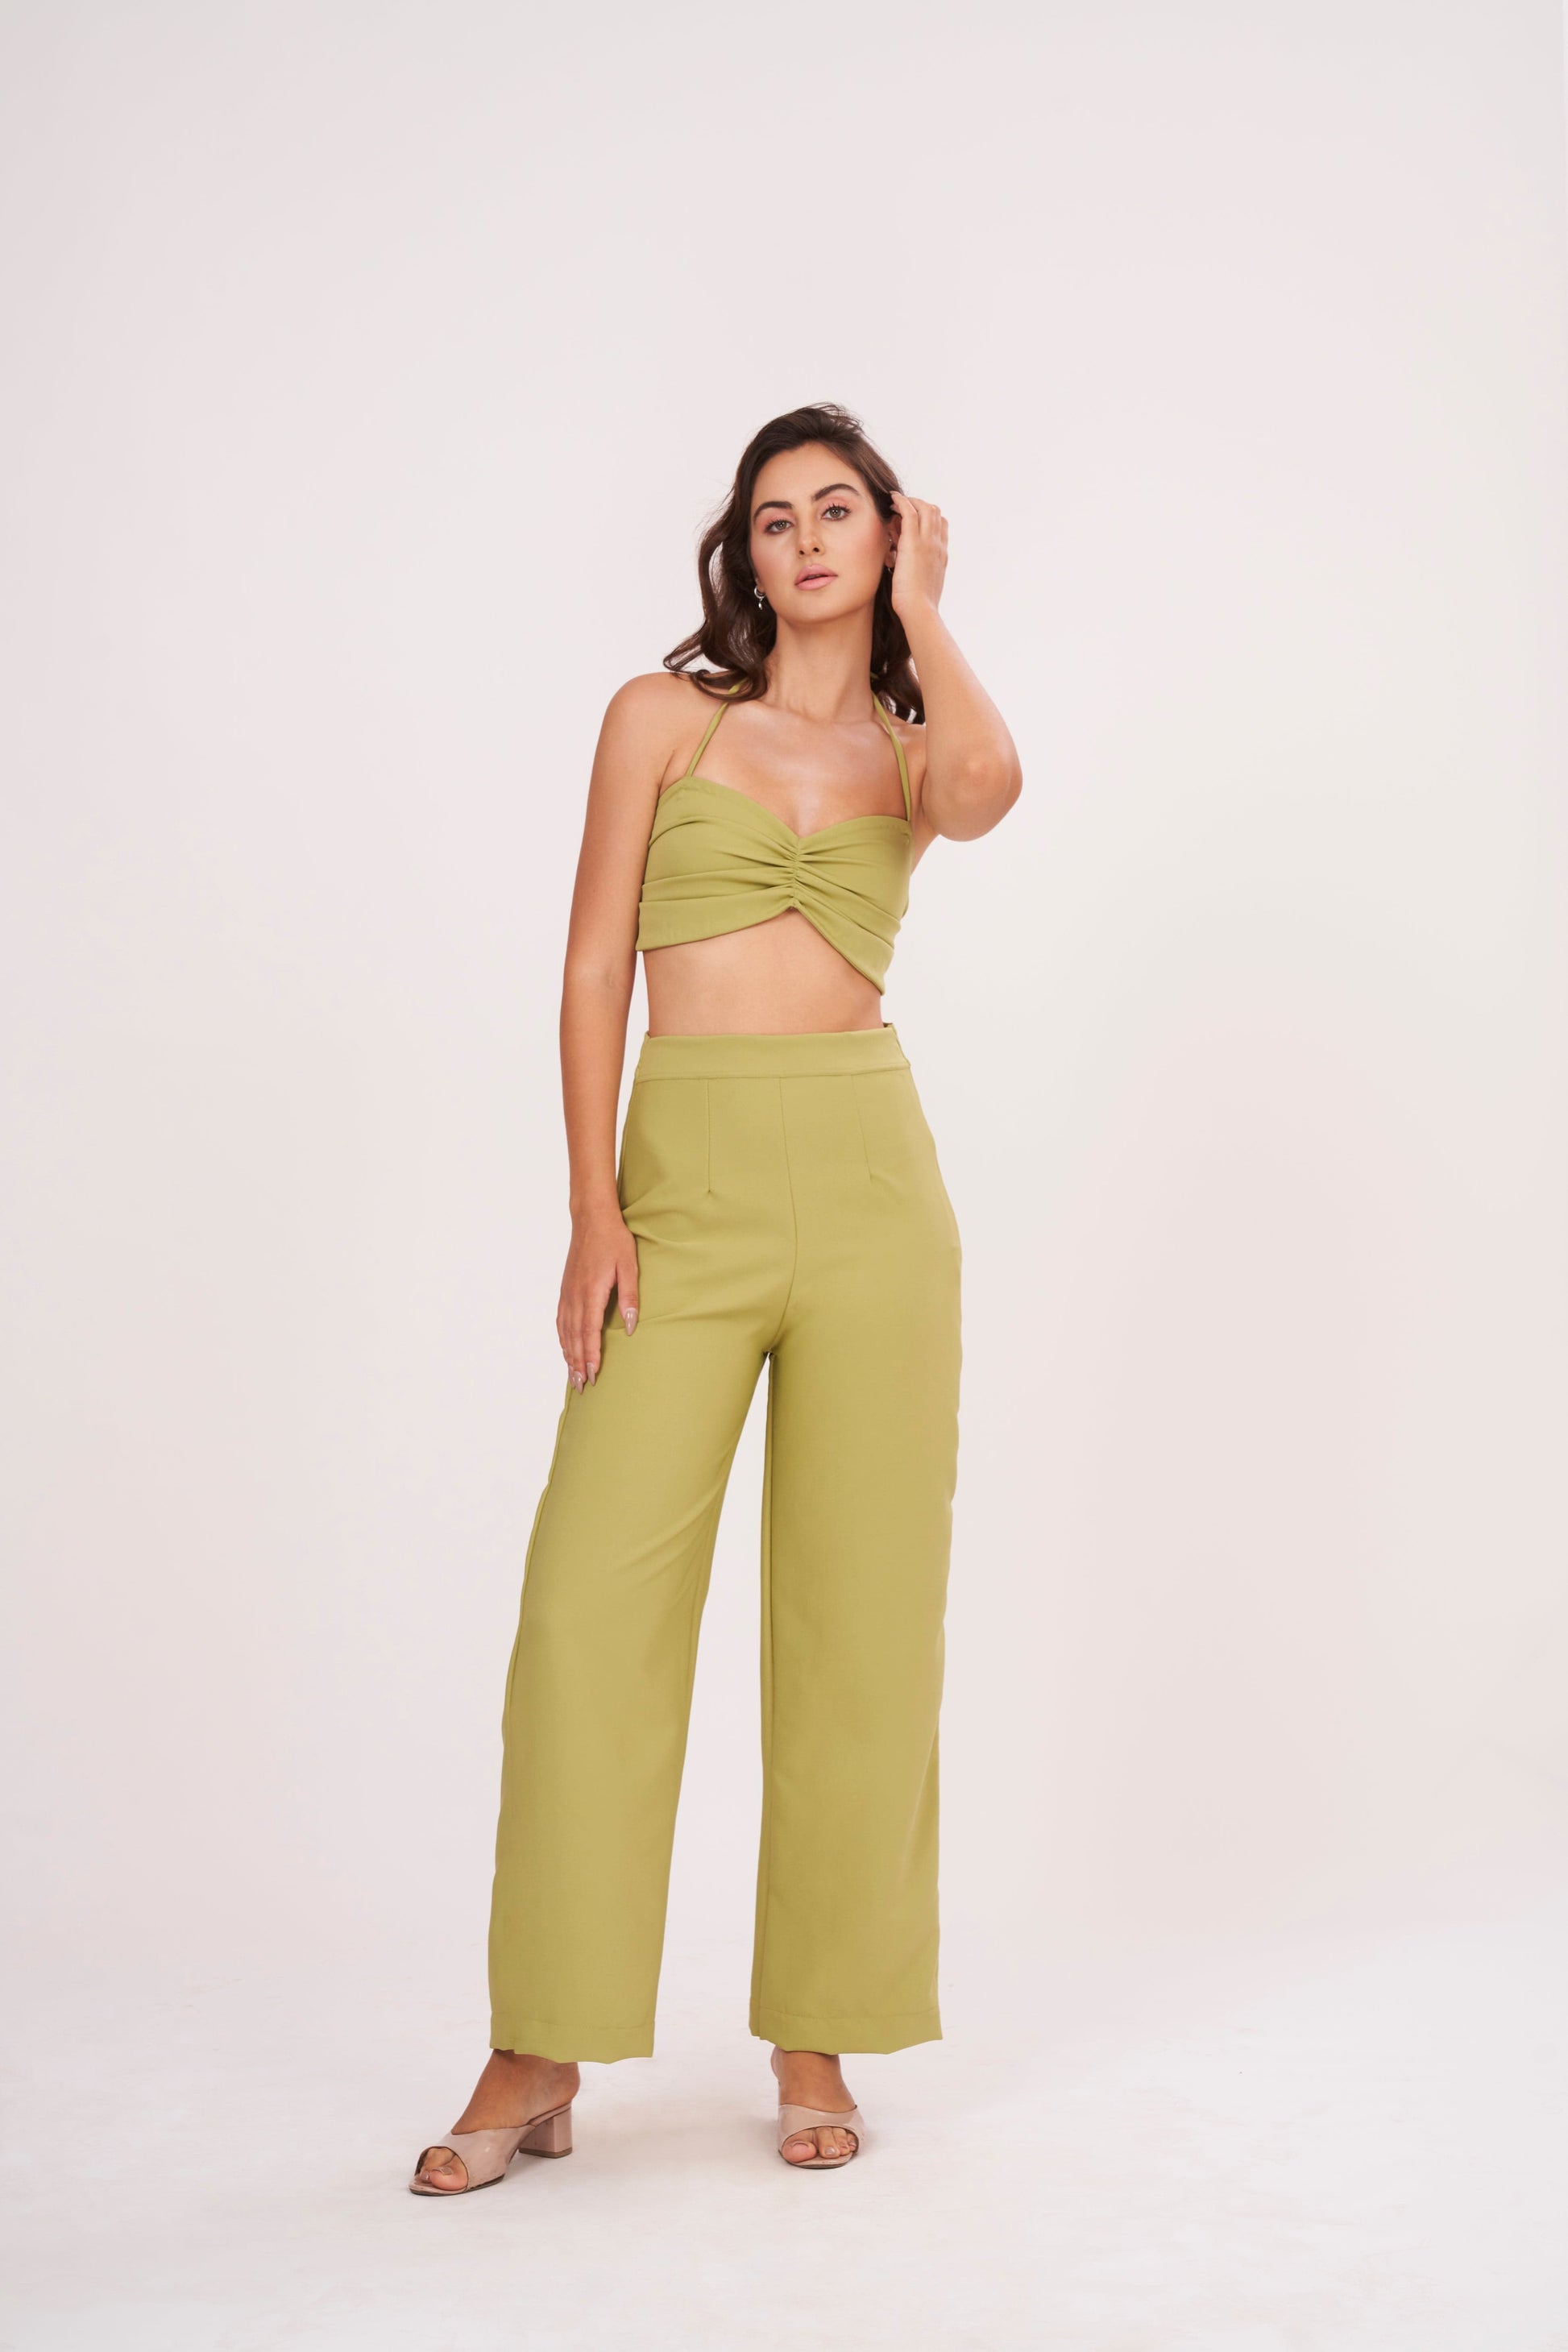  Trendy parallel trousers with maximum movement, breathability, elasticated waistband, high-rise fit, and flattering look for any occasion.